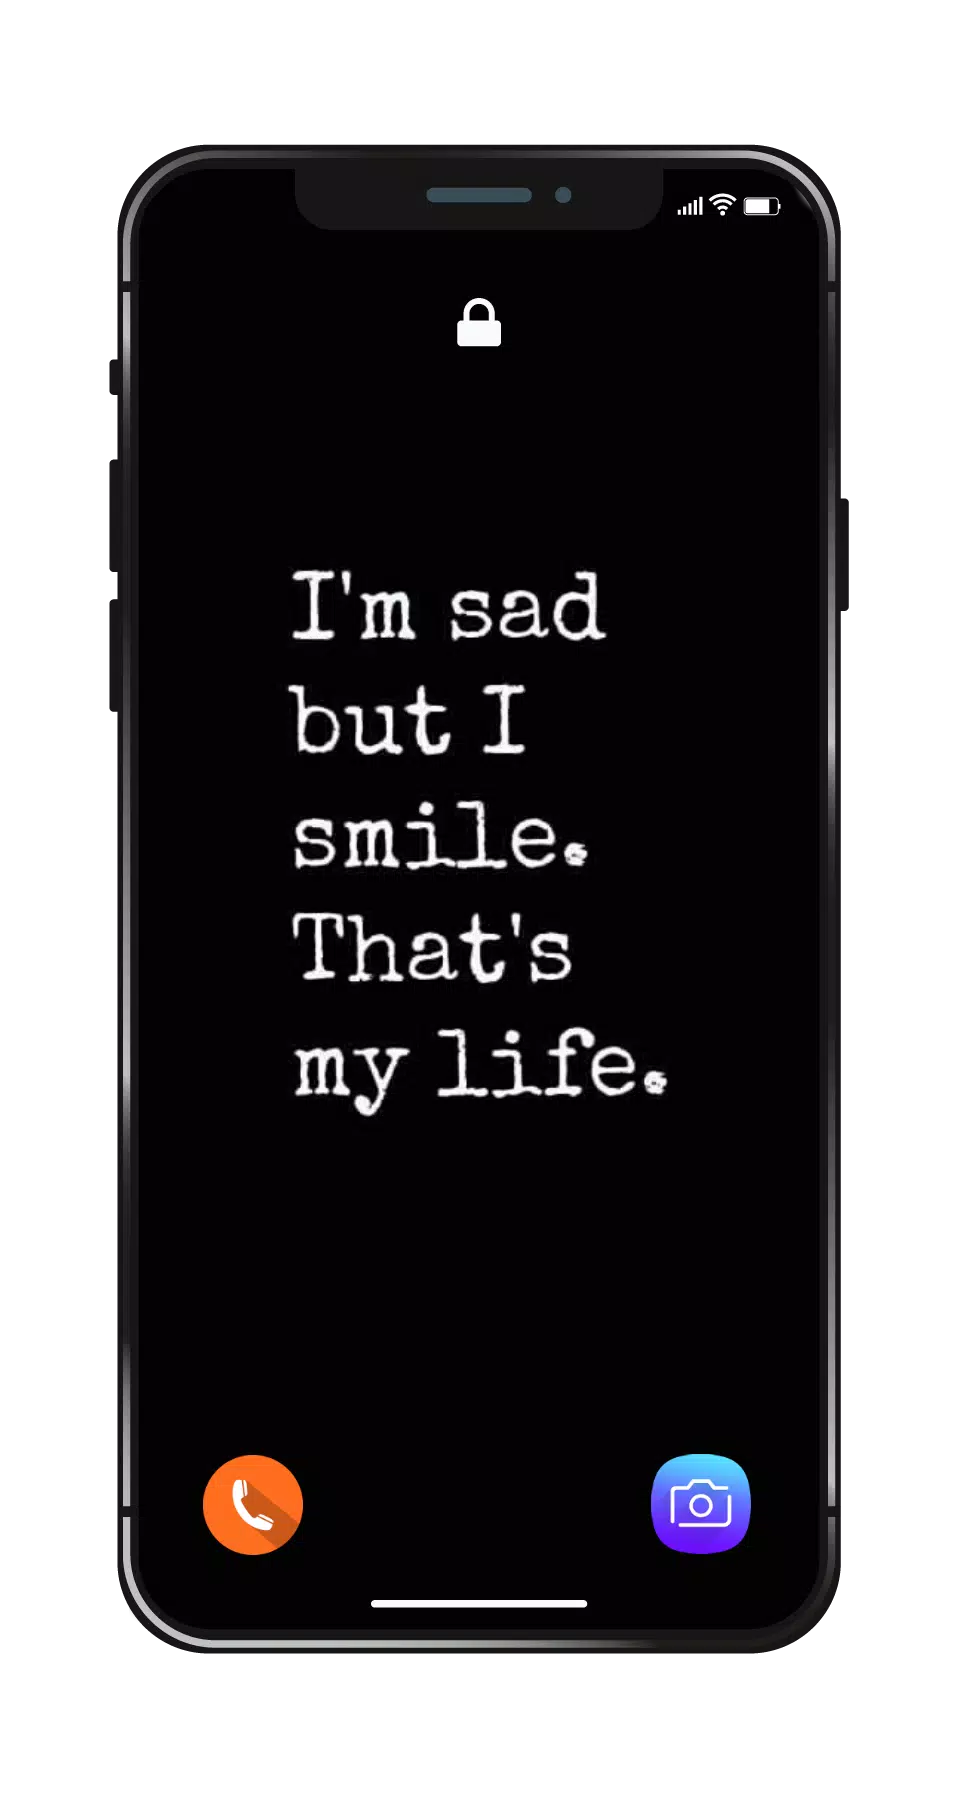 Sad quotes wallpapers hd k sad backgrounds apk for android download